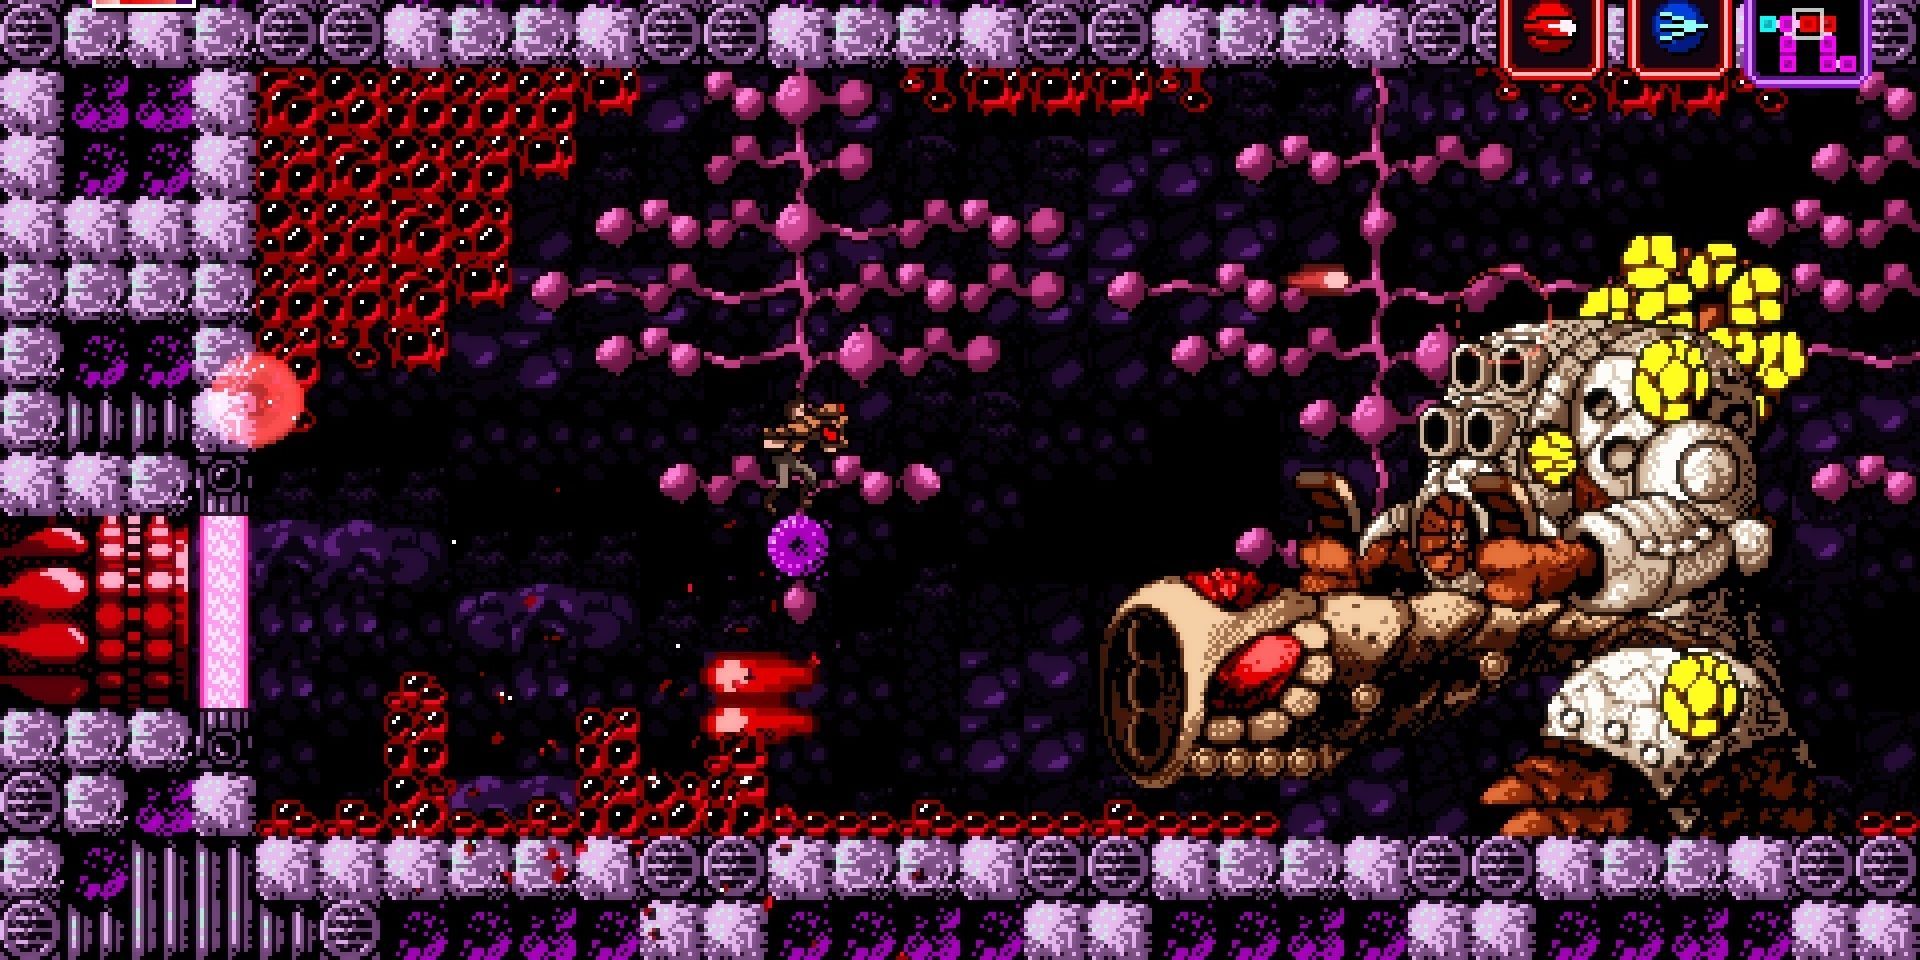 A combat sequence in Axiom Verge